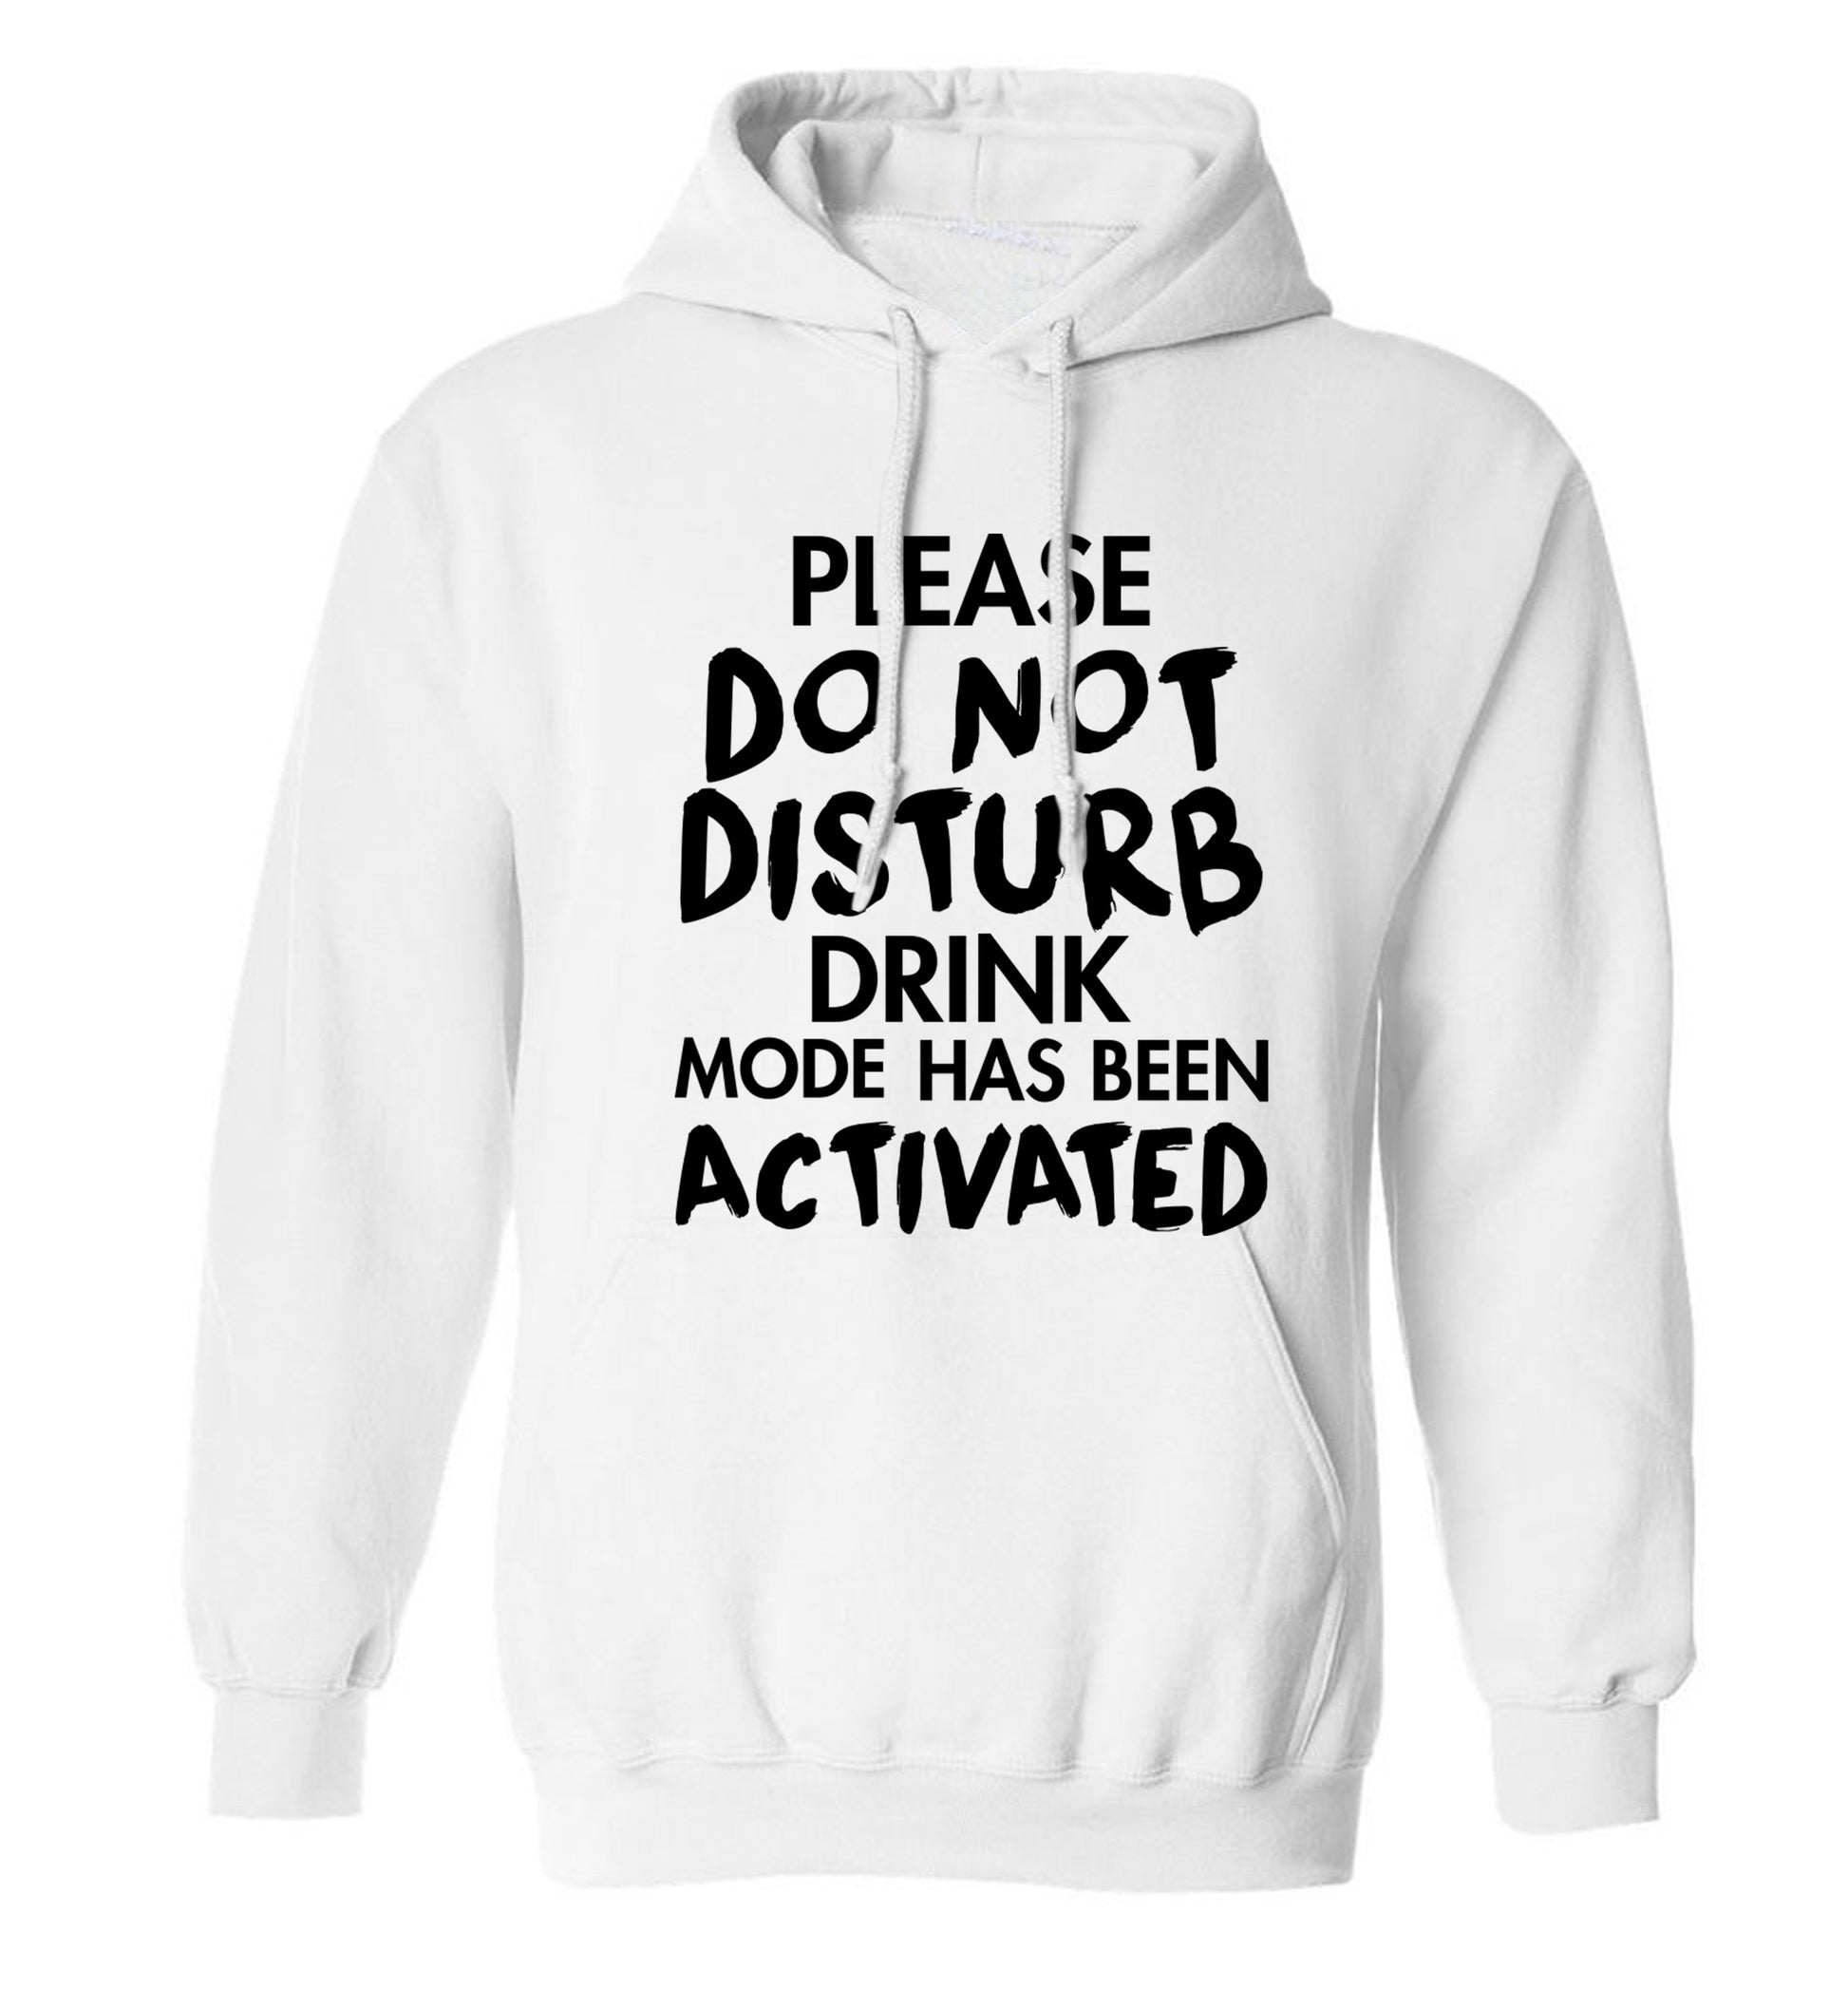 Please do not disturb drink mode has been activated adults unisex white hoodie 2XL